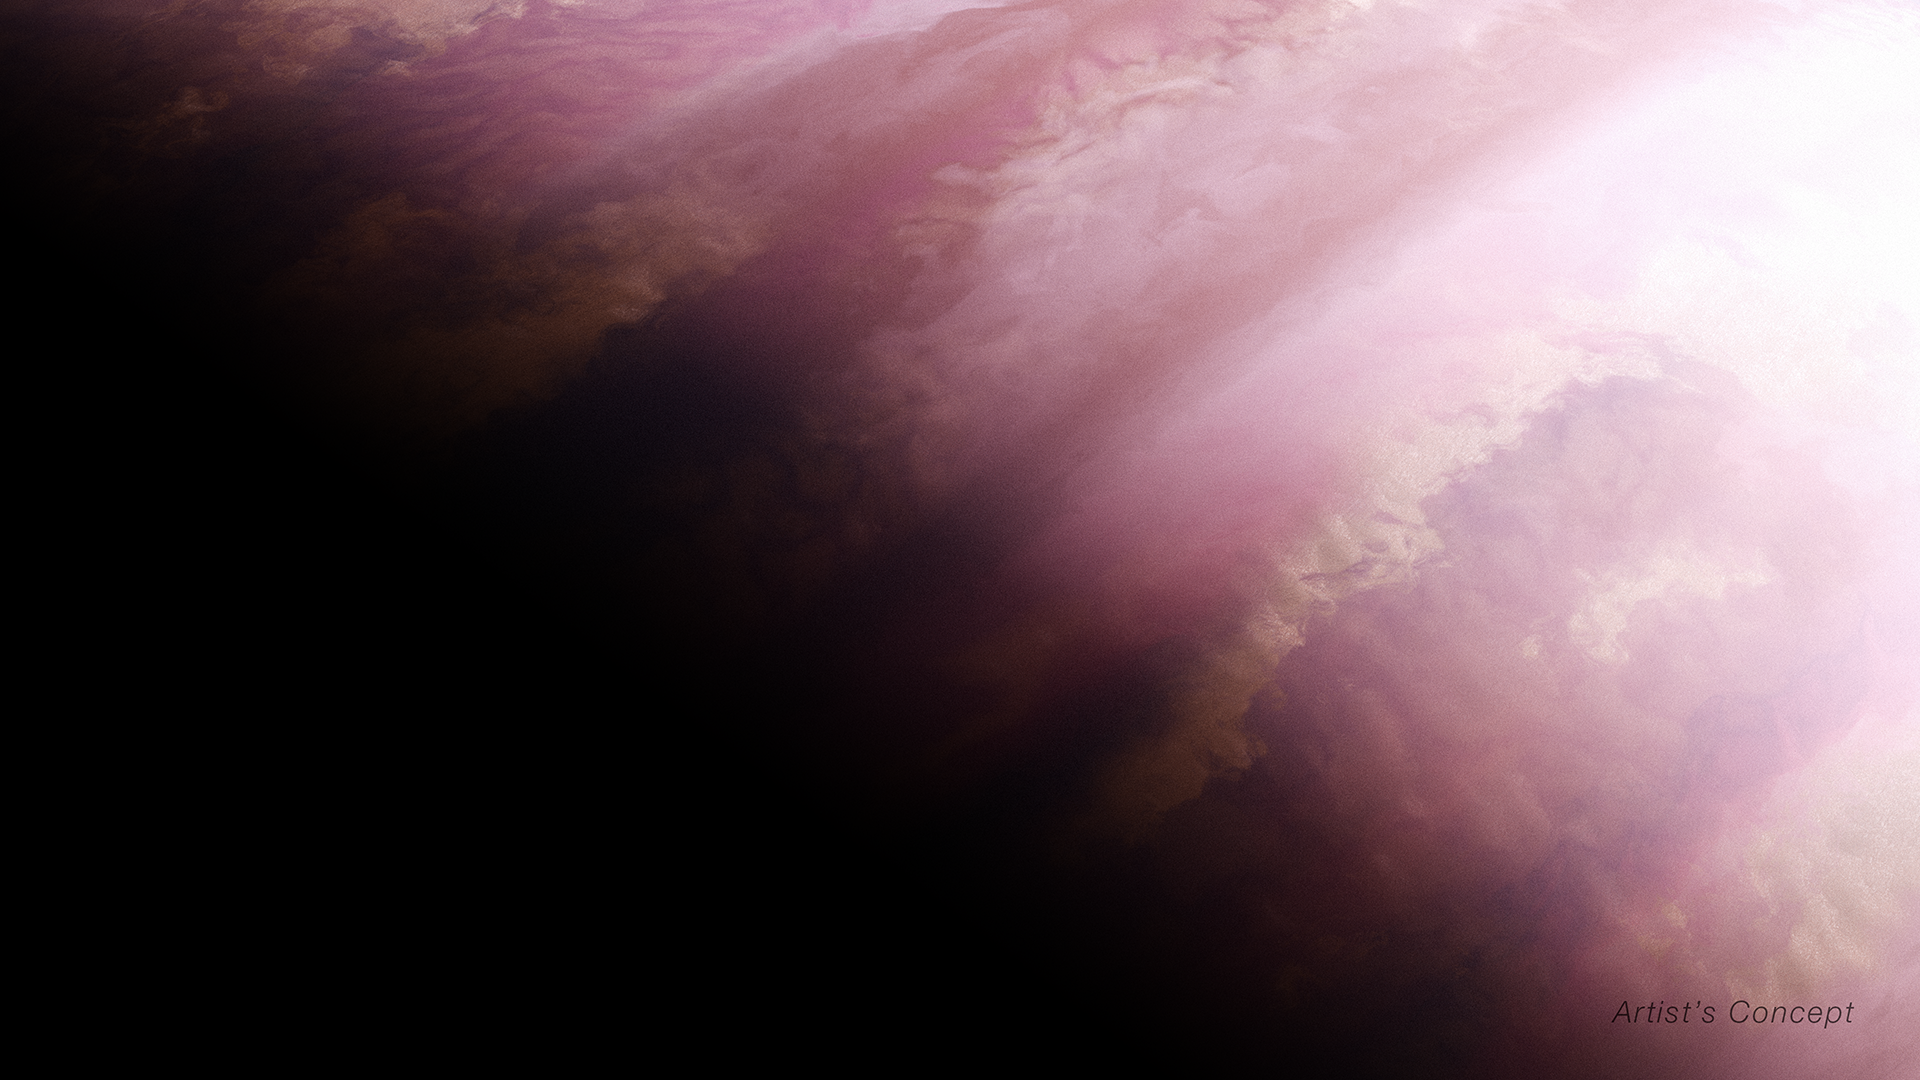 Illustration of a planet, zoomed in on the planet’s dayside/nightside boundary. The planet encompasses takes up the full image. At the bottom left, the image is dark, depicting the nightside covering the planet in a dark shadow. In the right side of the image, the planet has a fuzzy orange-pink atmosphere with hints of latitudinal wispy cloud bands. The right upper corner is bright, where the star (not illustrated) shines.